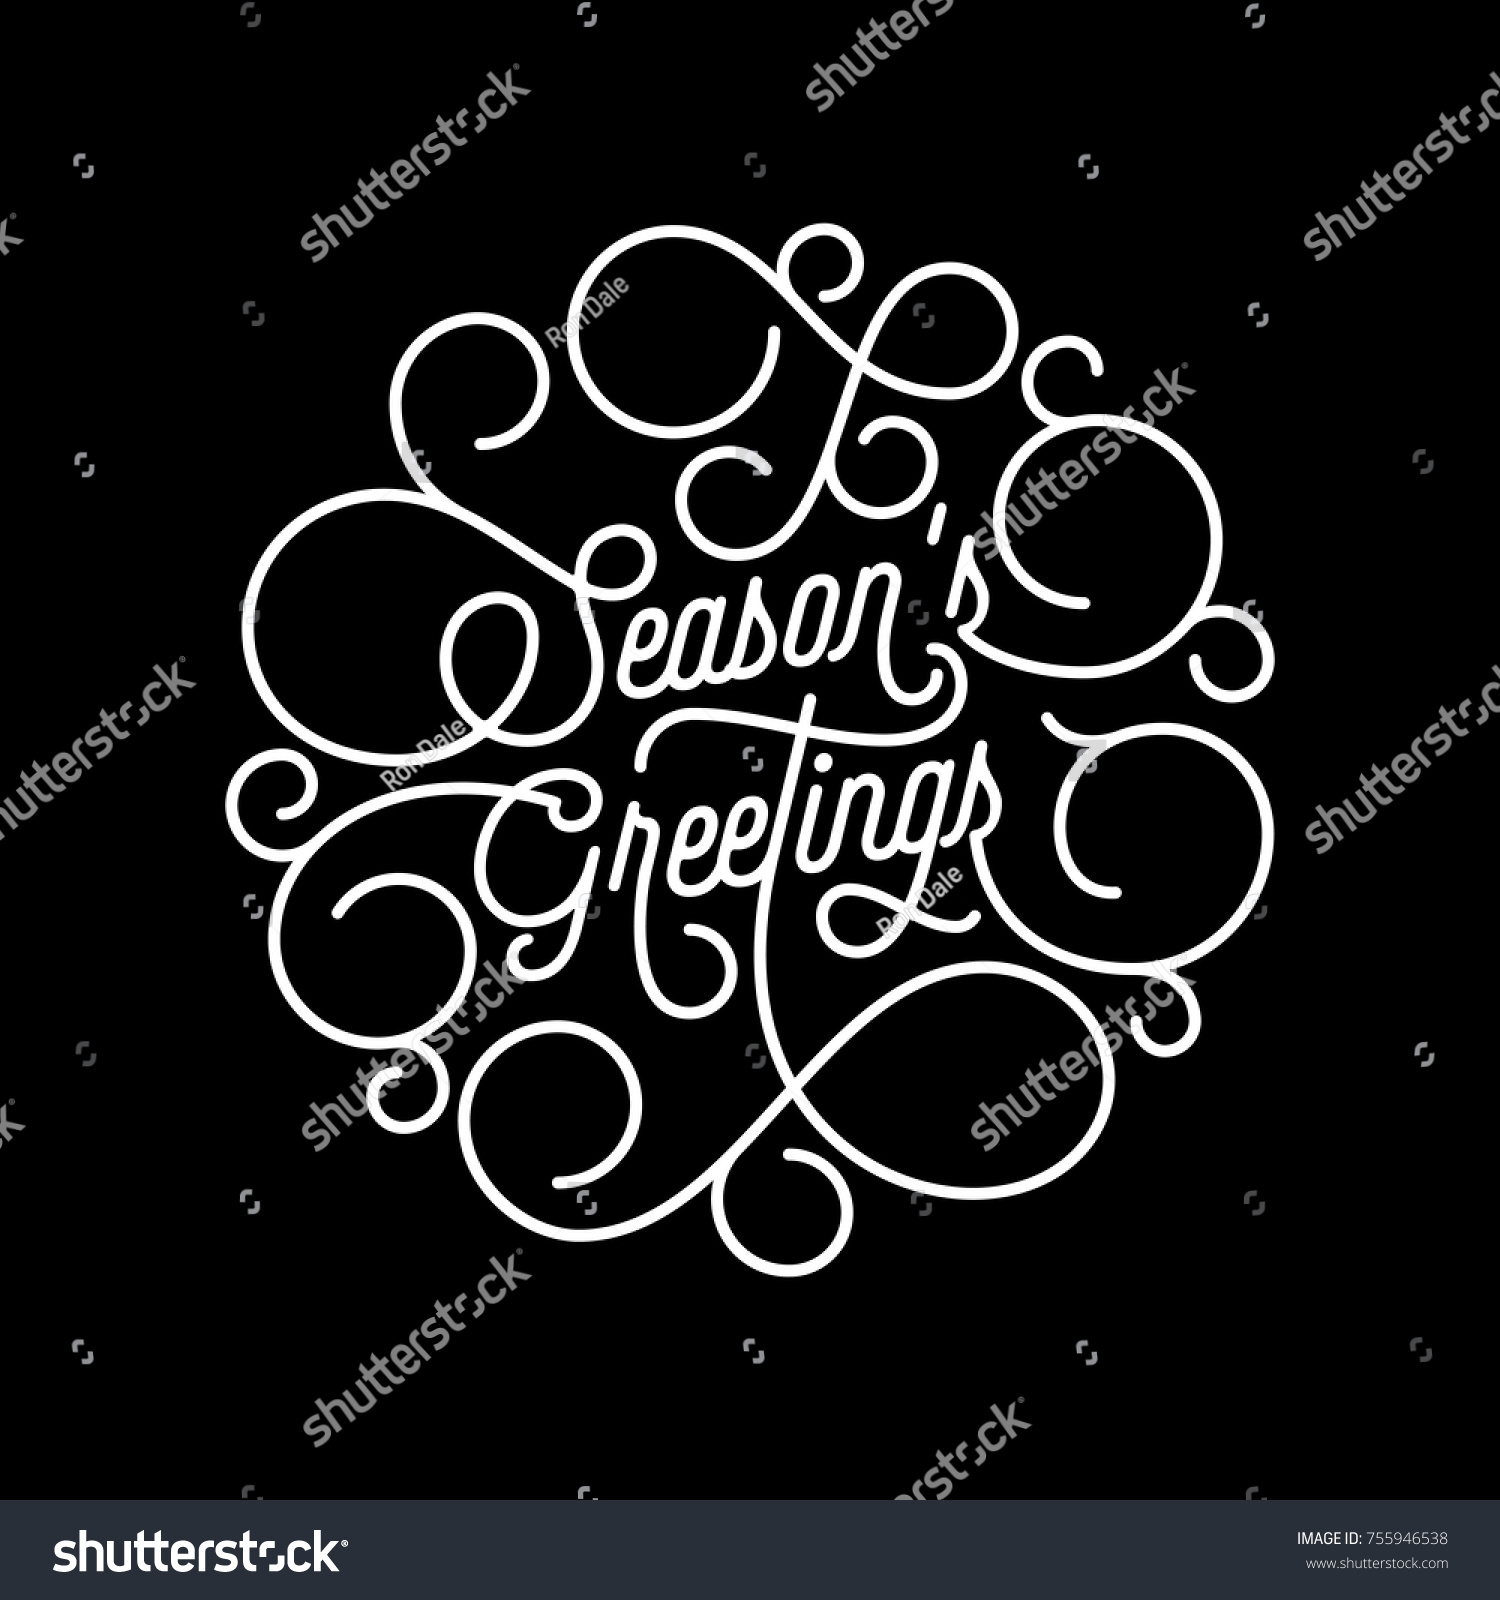 Season Greetings flourish calligraphy lettering of swash line typography for greeting card design Vector festive